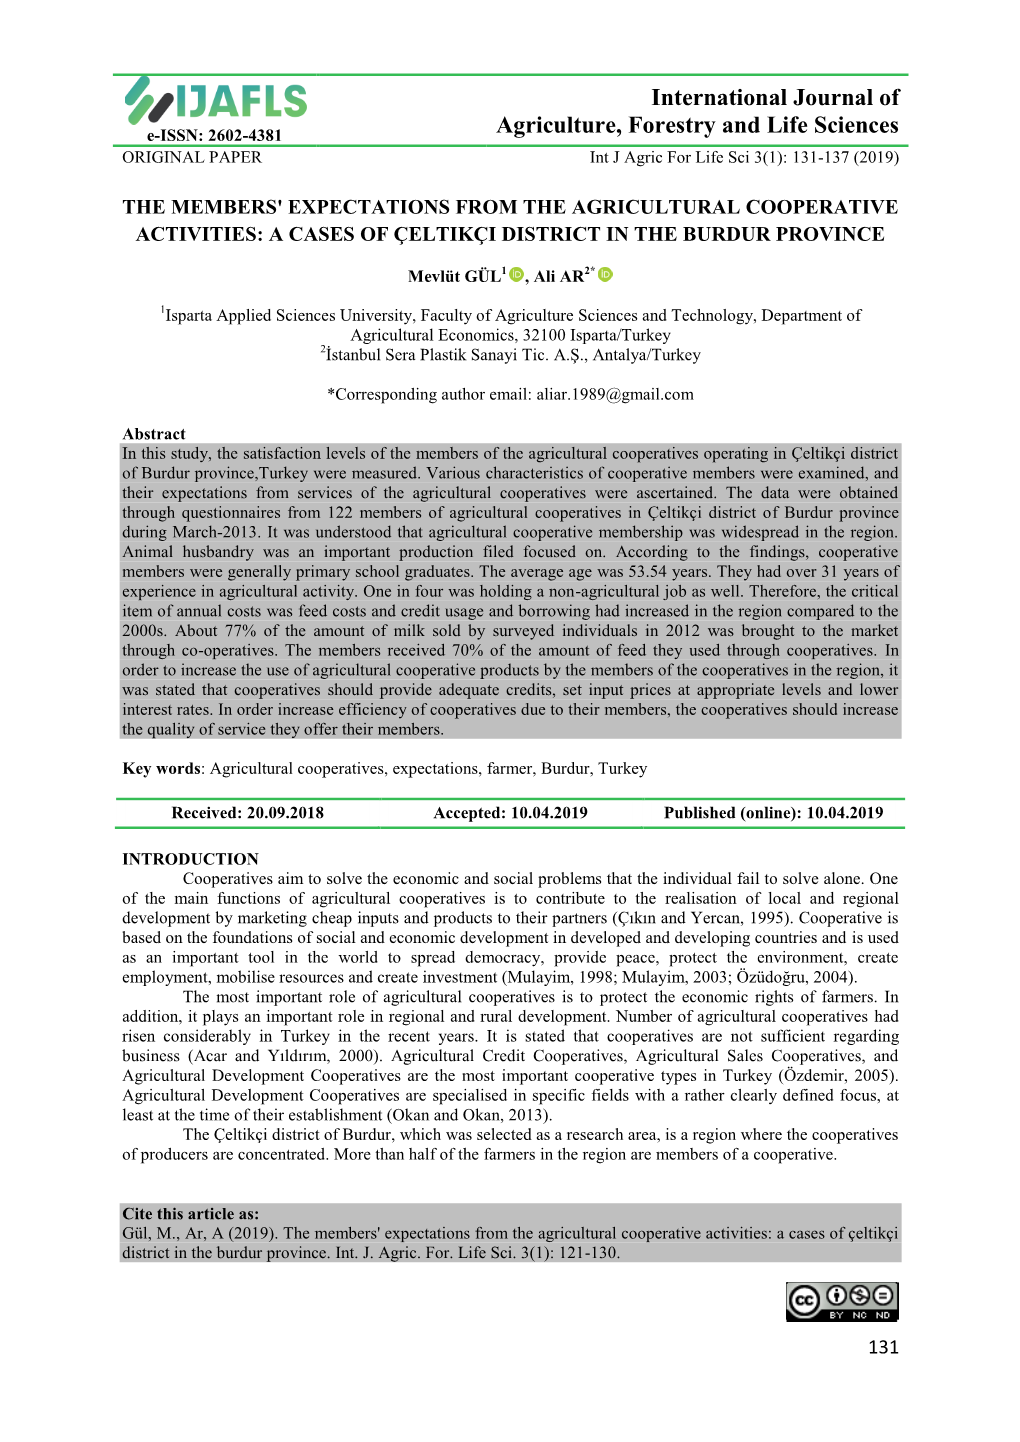 International Journal of Agriculture, Forestry and Life Sciences